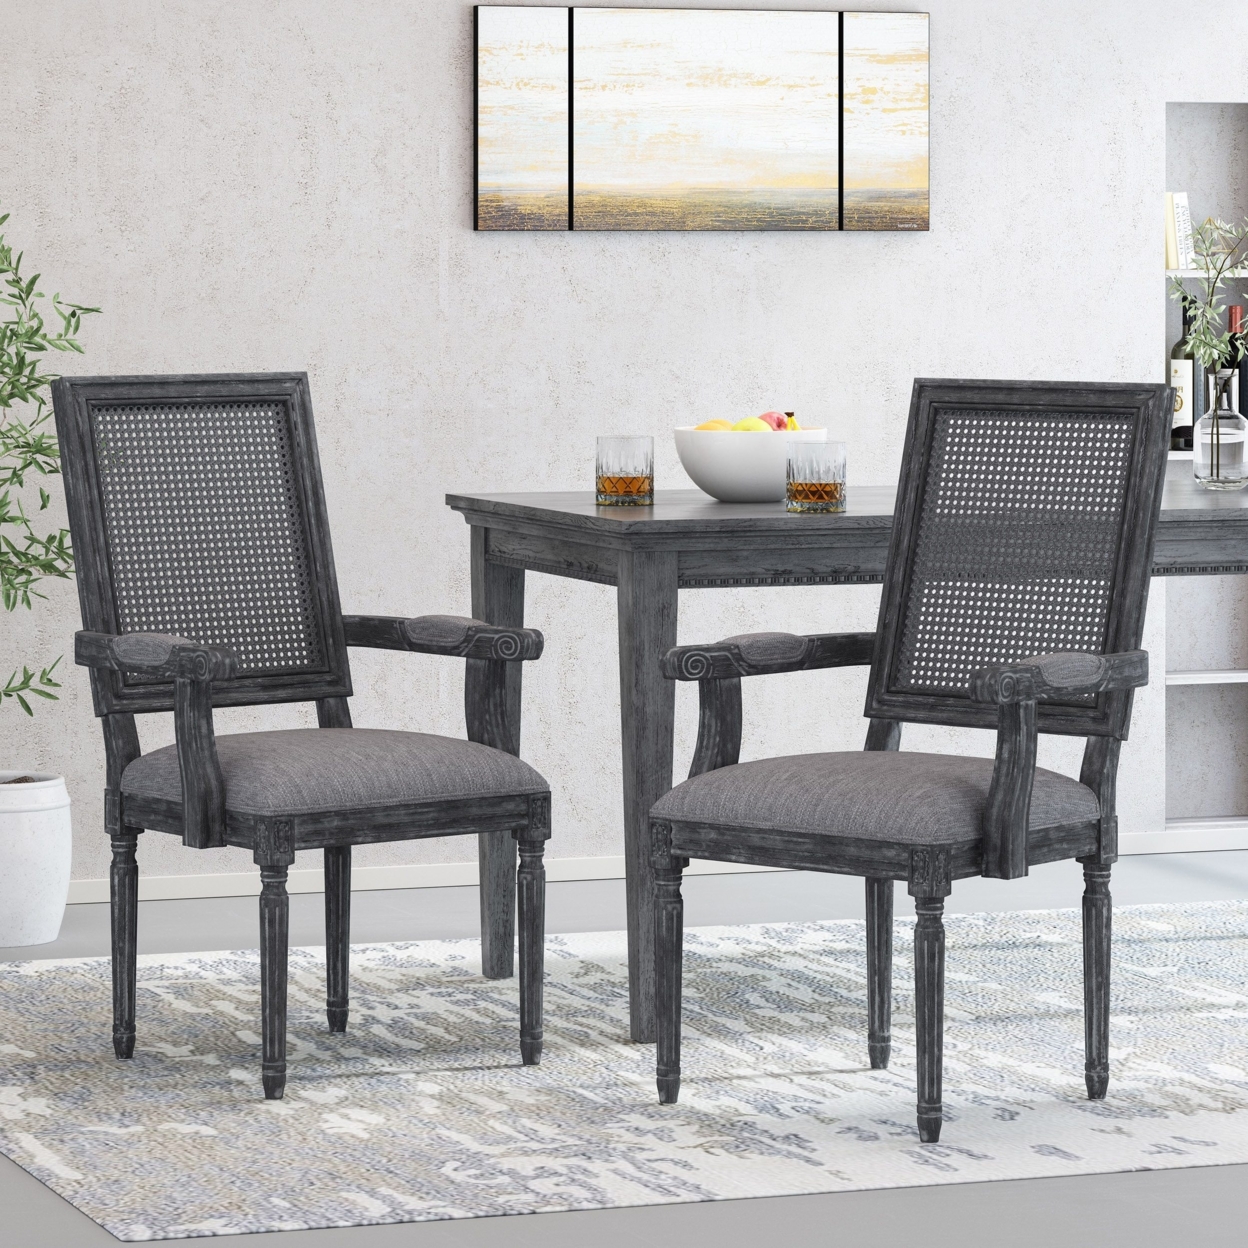 Zentner French Country Wood And Cane Upholstered Dining Chair - Gray/brown, Set Of 2